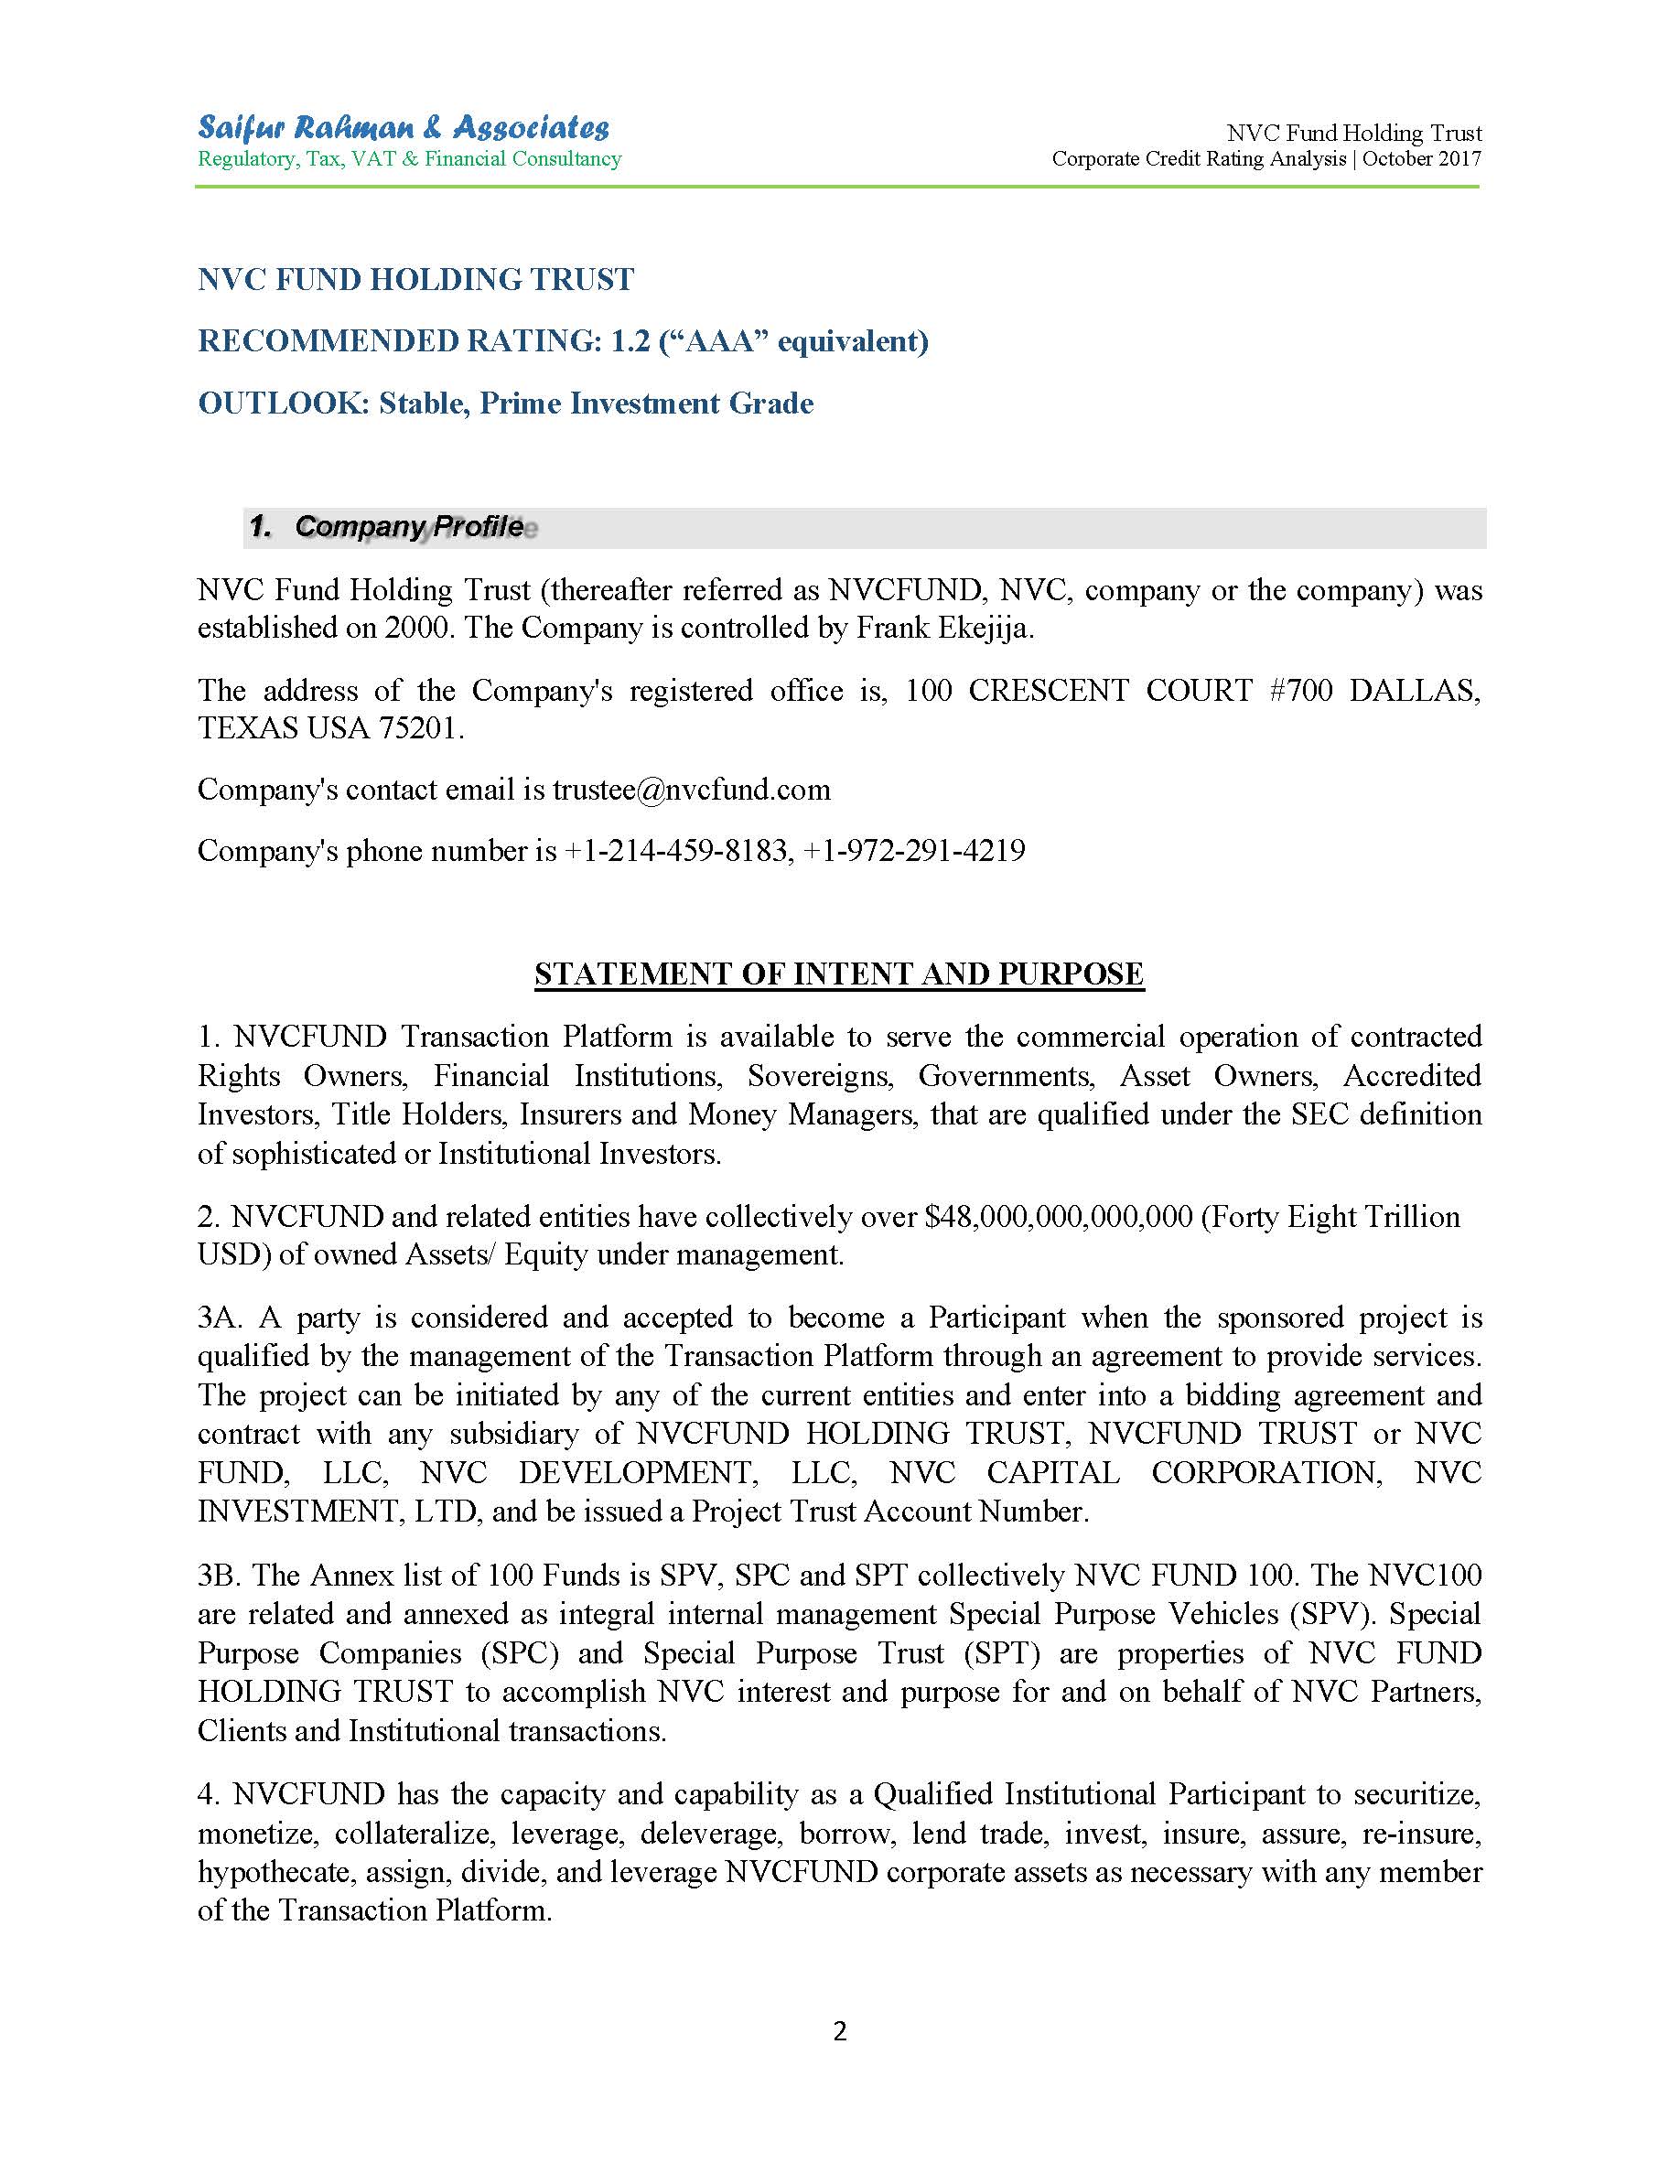 NVC_FUND HOLDINGS_CREDIT_RATING REPORT (1)_Page_04.jpg